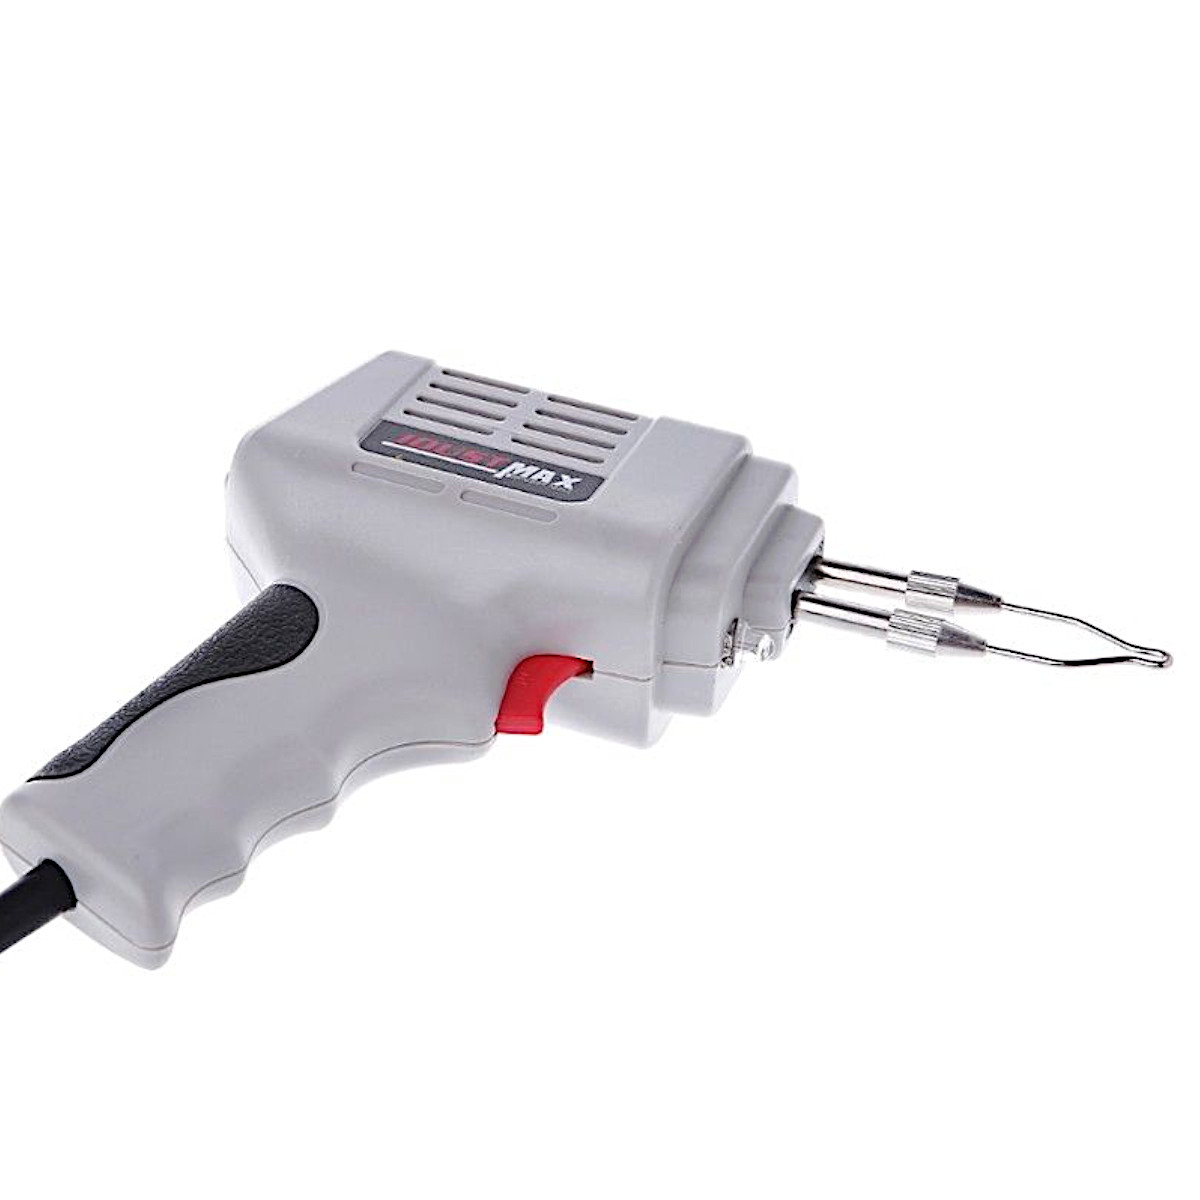 100W-220V-to-240V-Electrical-Soldering-Iron-Fast-Electric-Welding-Solder-Tool-EU-Plug-1393550-6